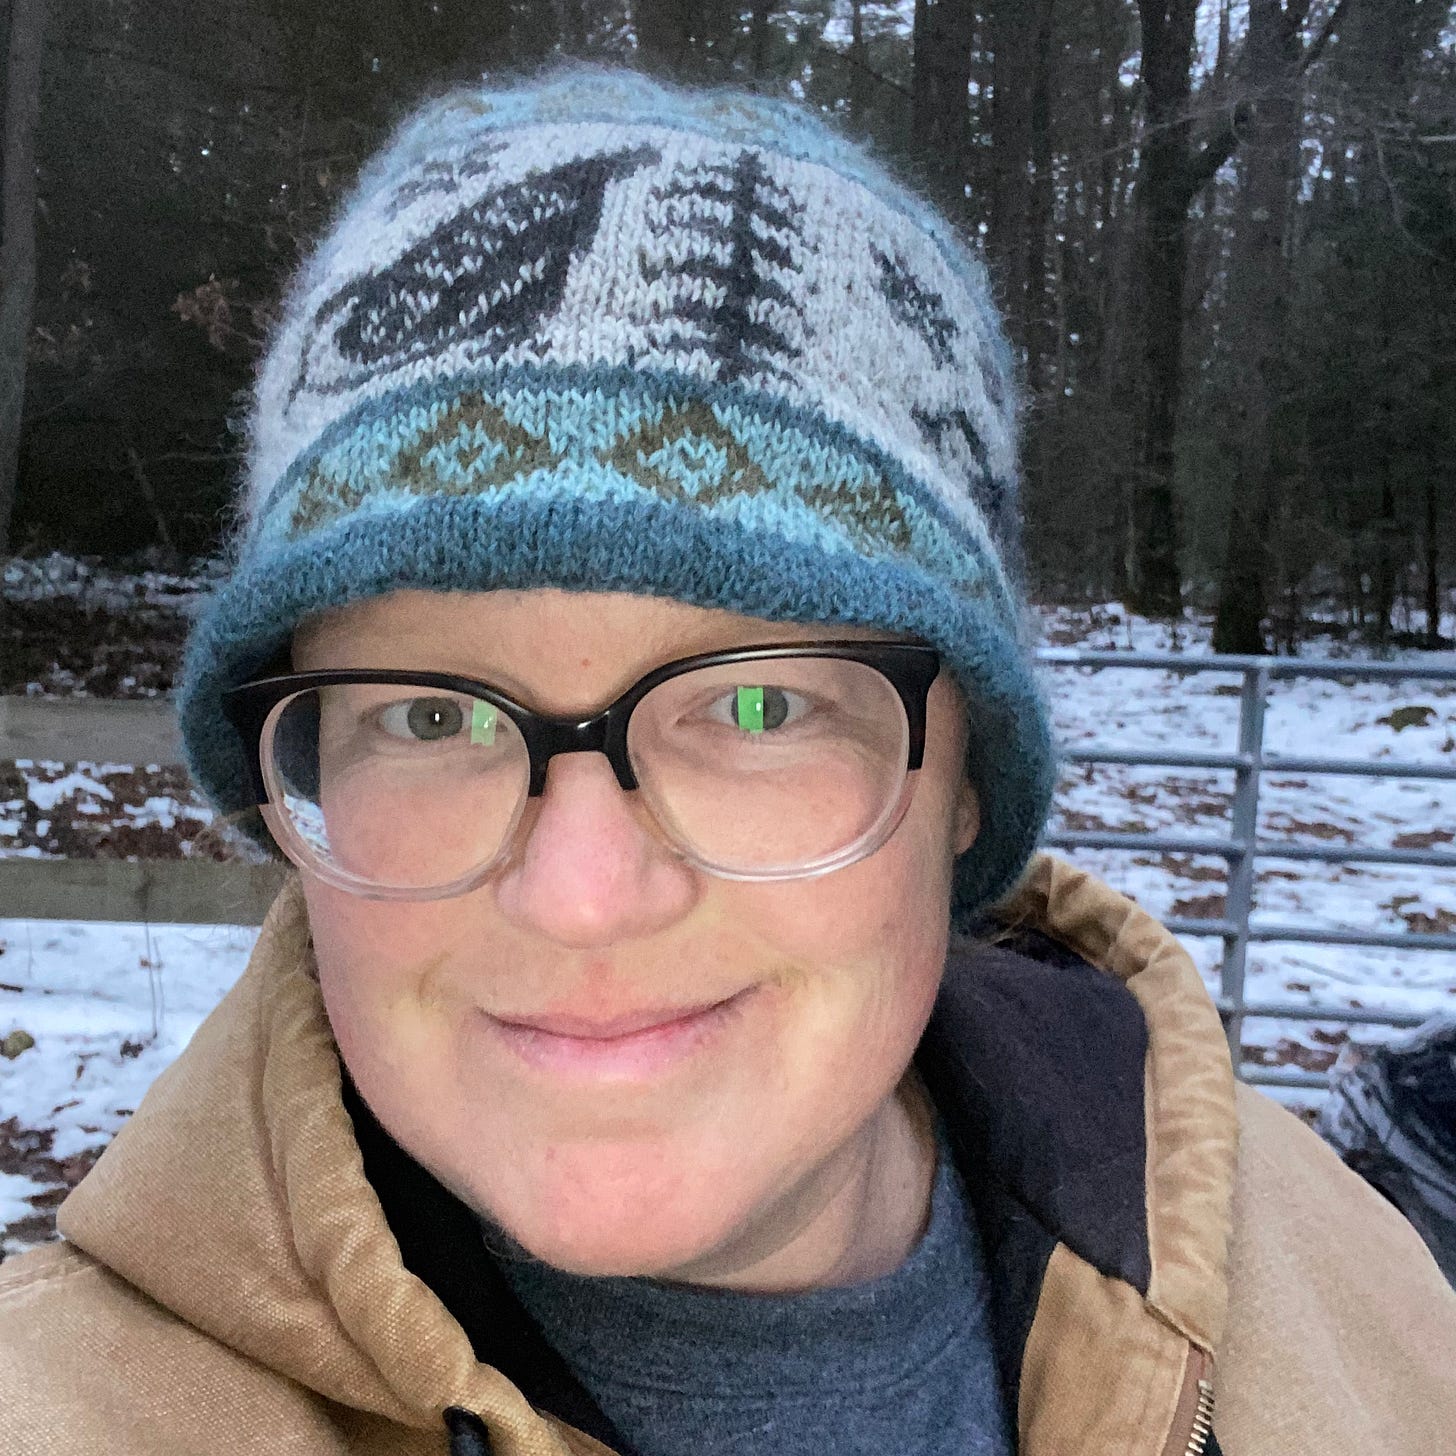 I’m standing outside wearing a knitted hat patterned with nuthatches and trees.